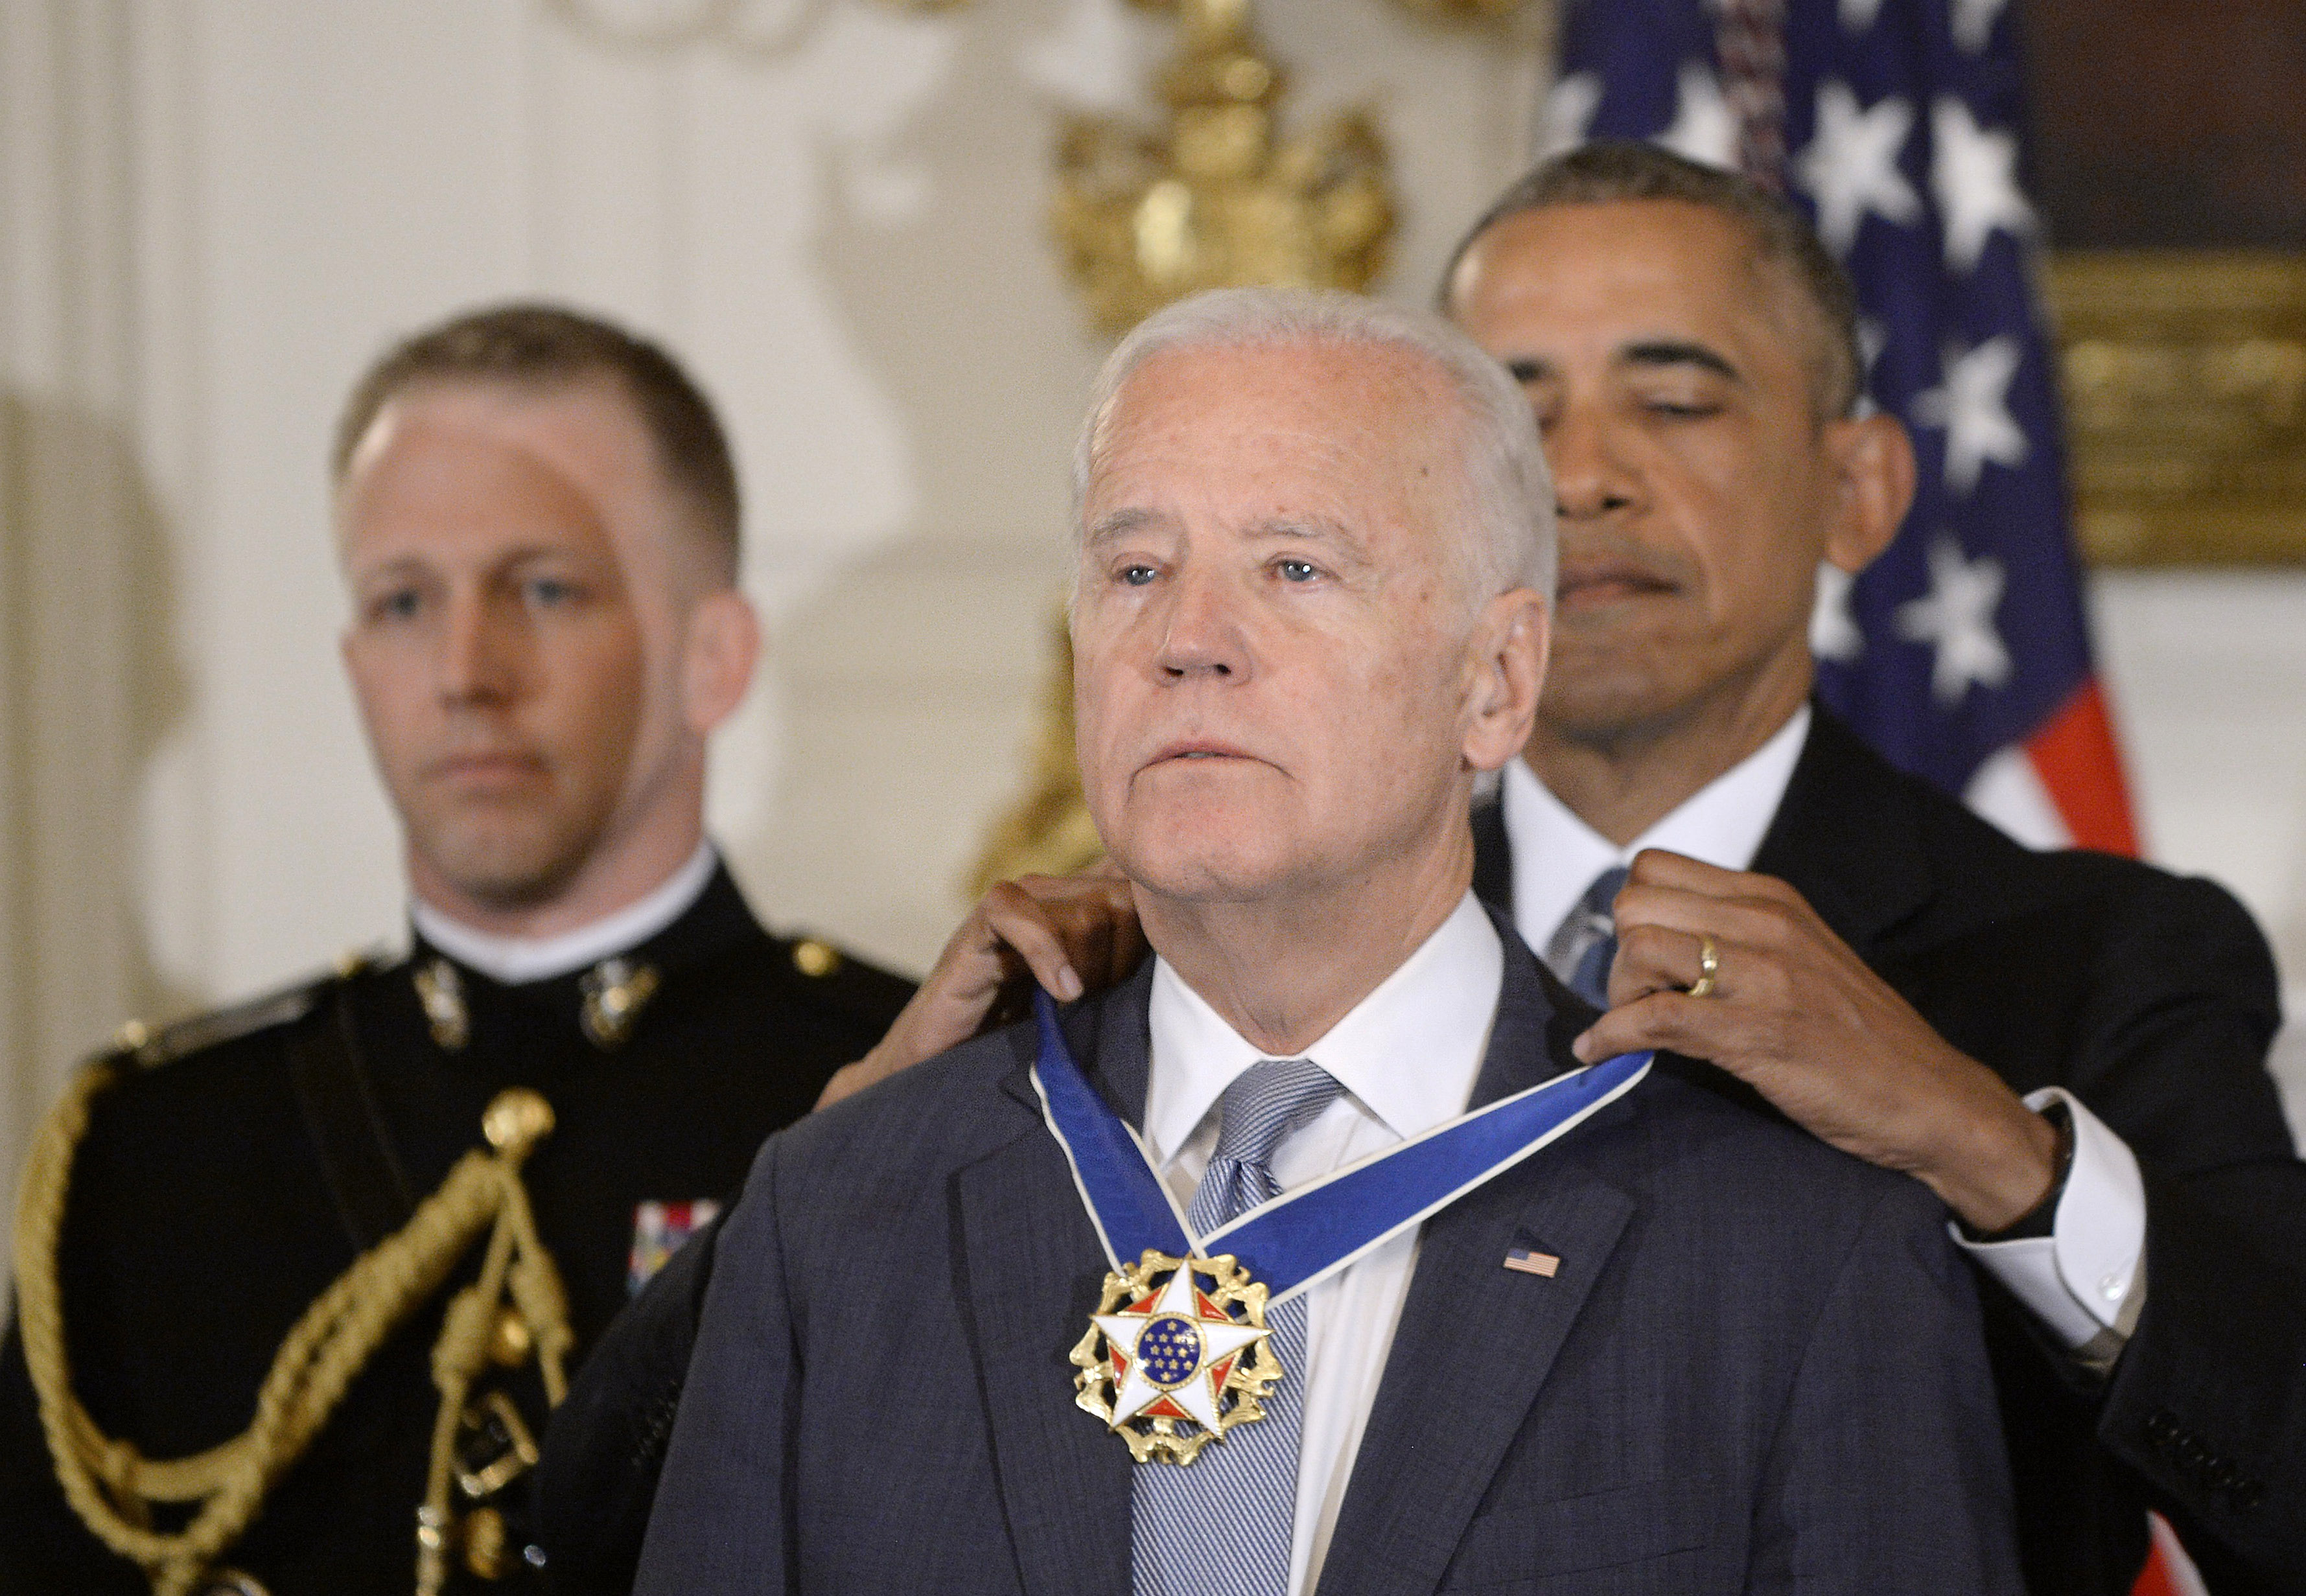 Just How Rare Is The Presidential Medal Of Freedom With Distinction